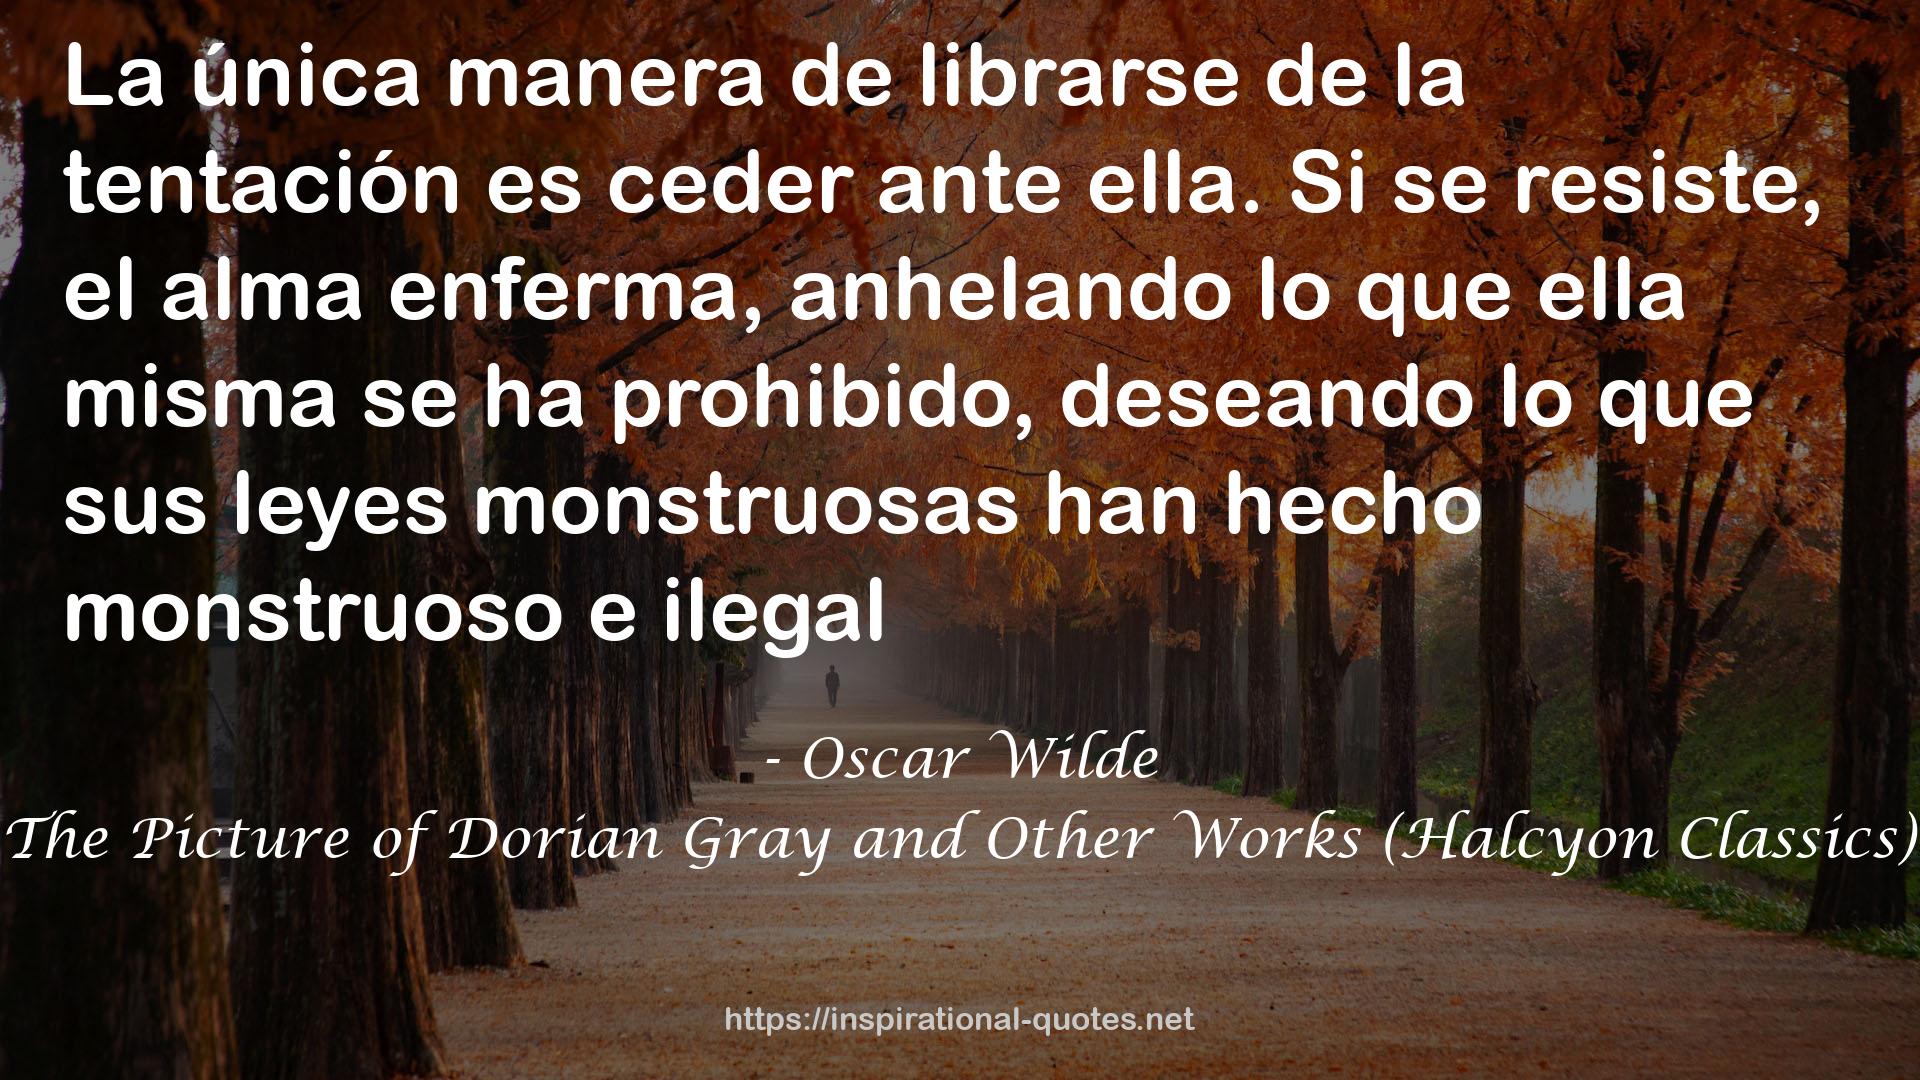 The Picture of Dorian Gray and Other Works (Halcyon Classics) QUOTES